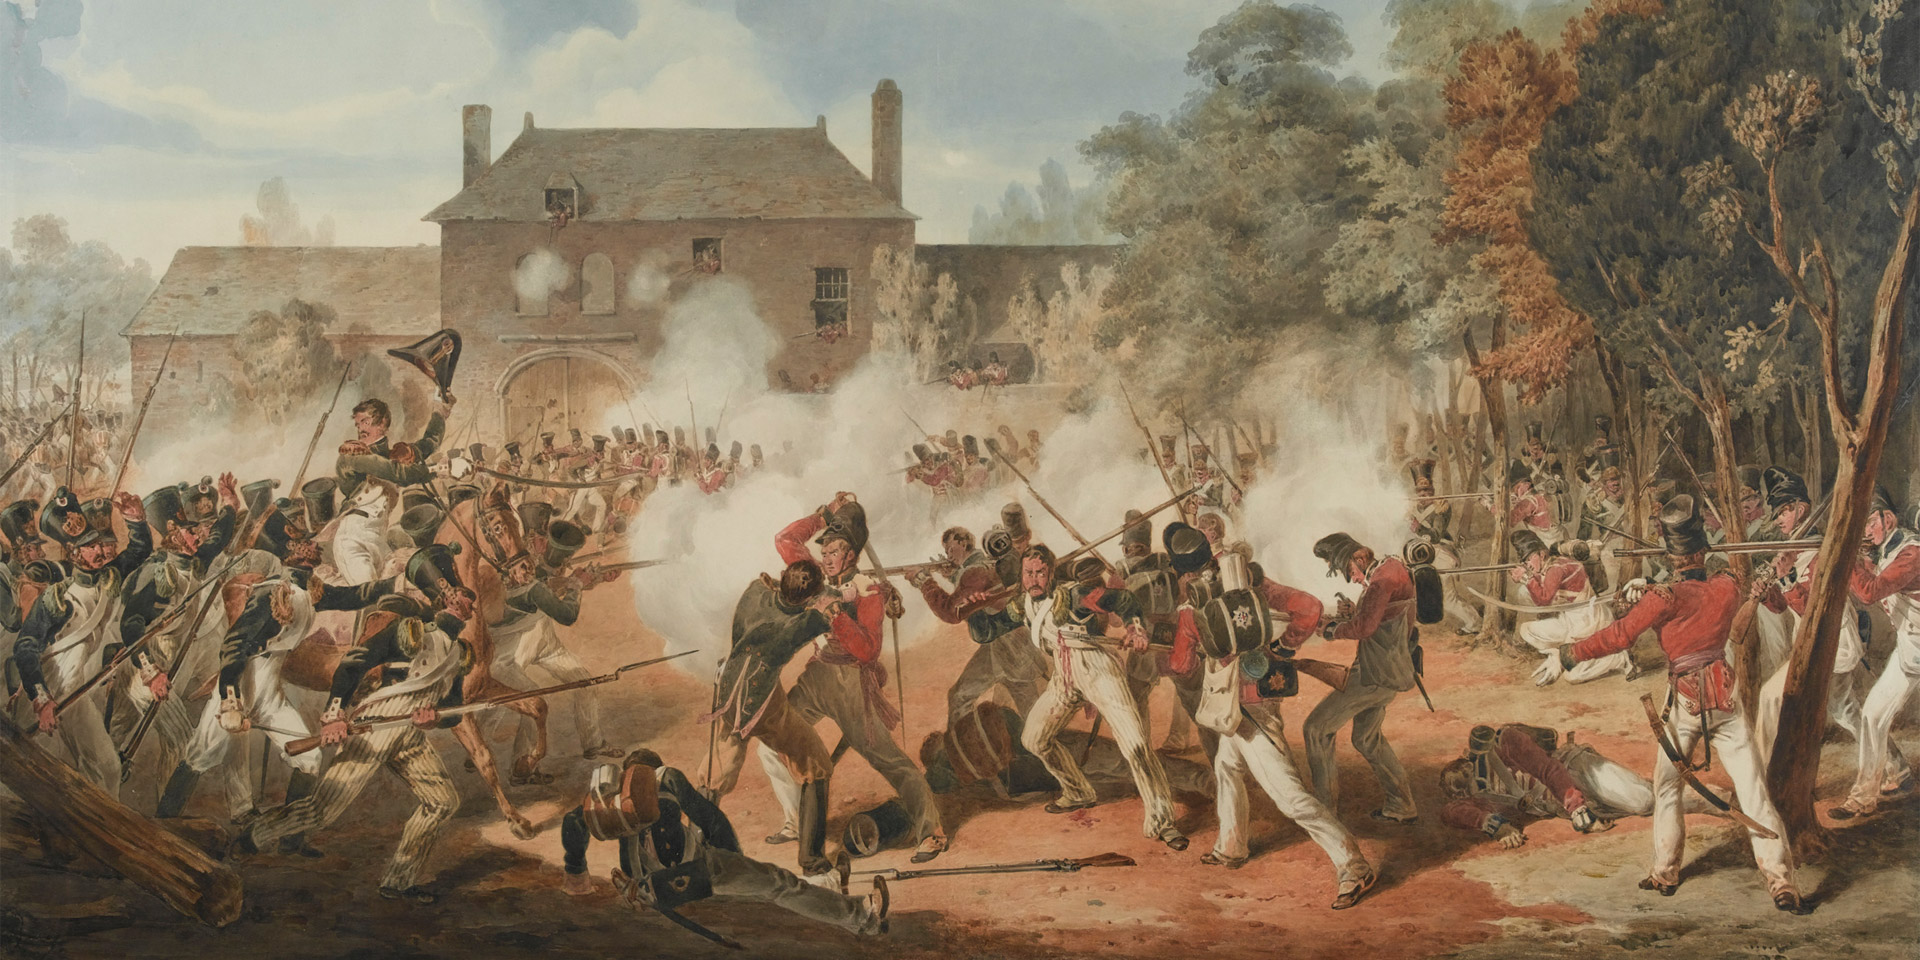 Defence of the Chateau de Hougoumont by the Coldstream Guards, Battle of Waterloo, 18 June 1815